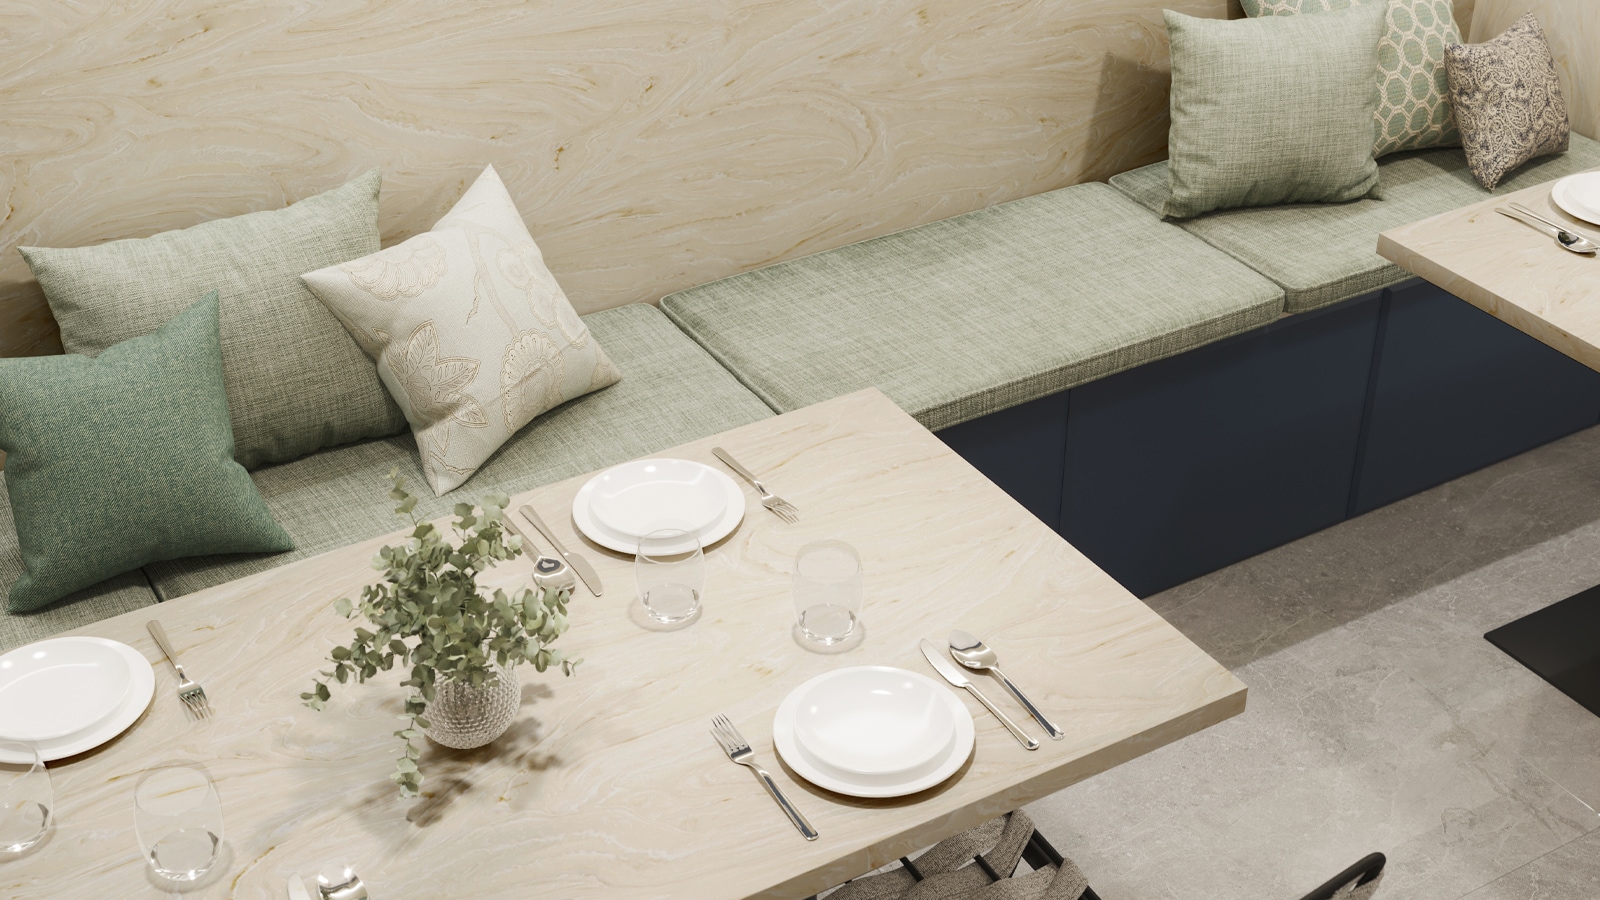 Krion expands its Luxury range with its most natural shade yet